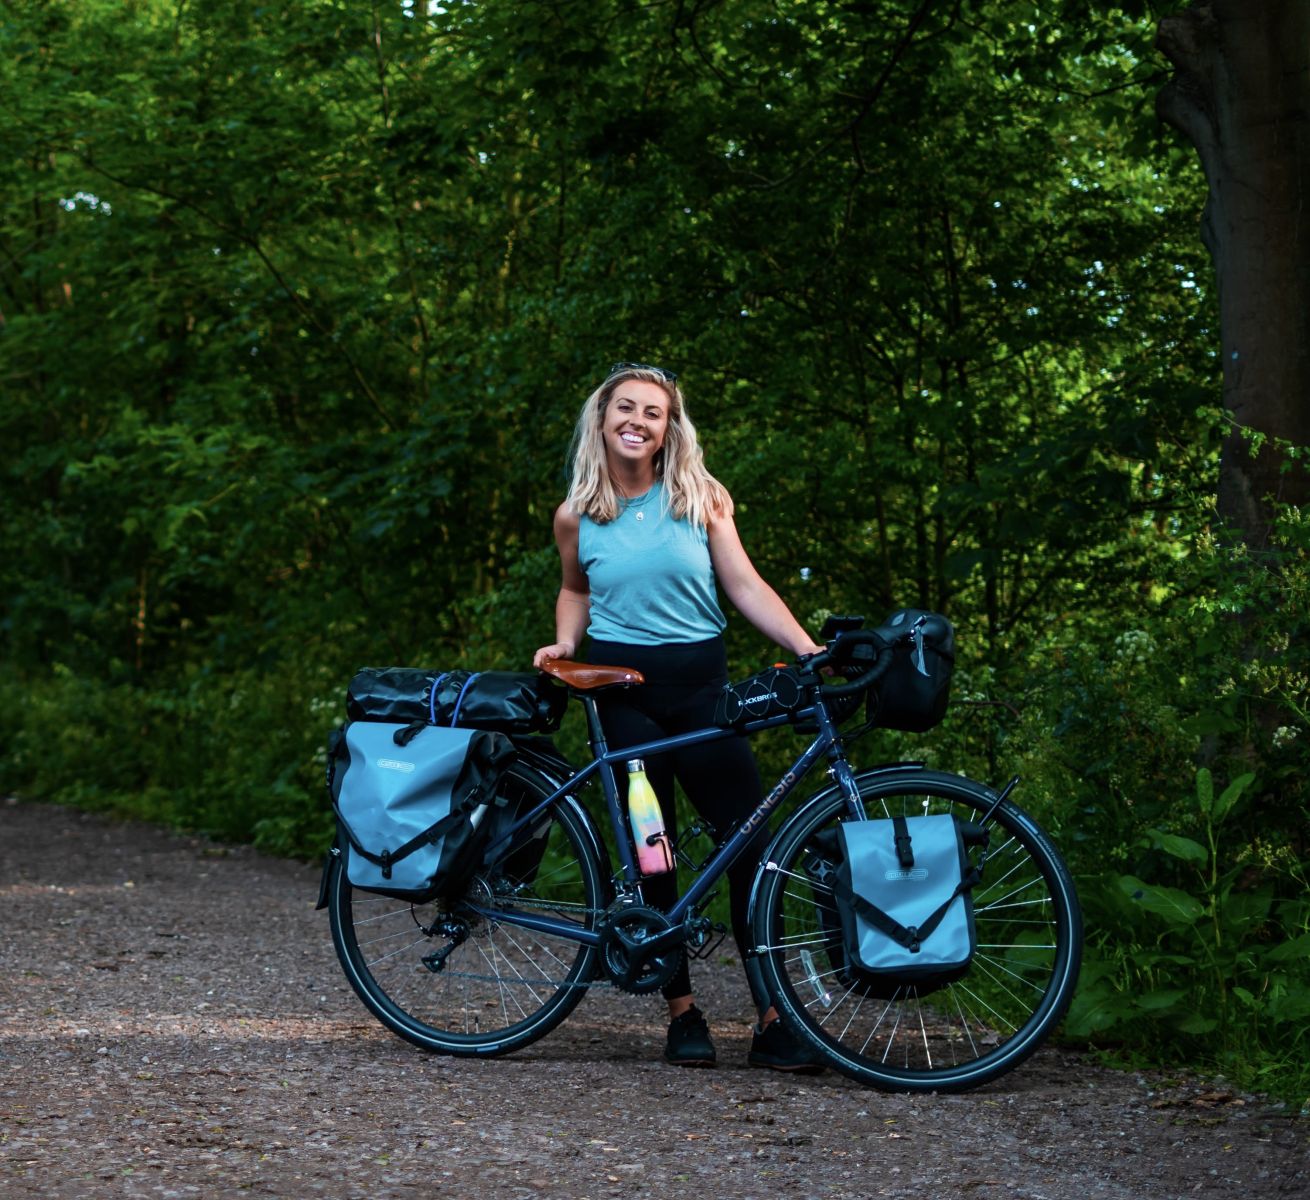 Woman in her late 20s wearing a blue top and black leggings standing with a bike